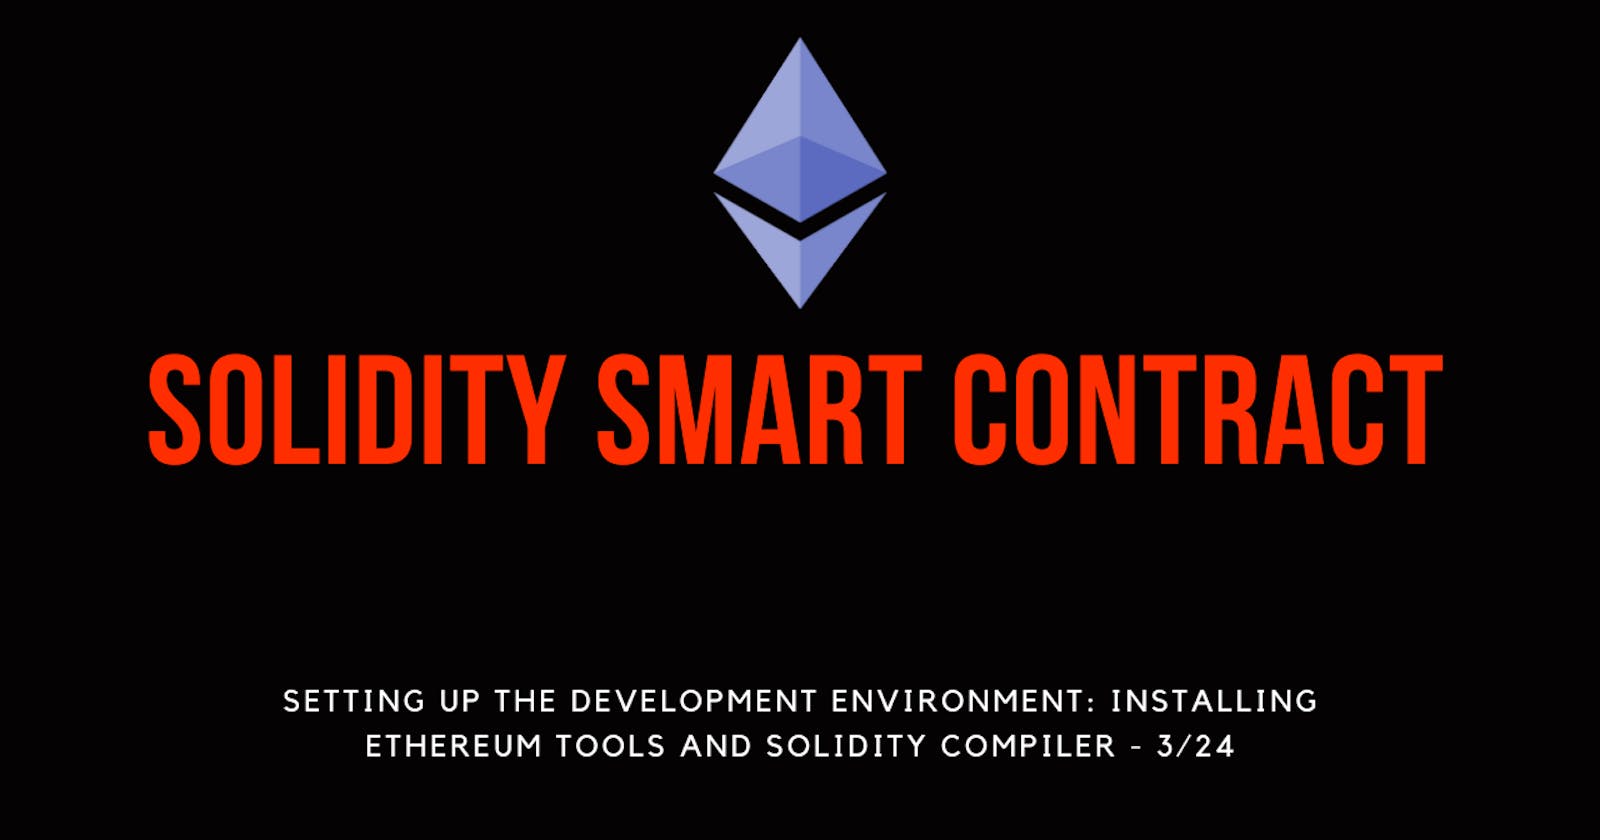 Setting Up the Development Environment: Installing Ethereum Tools and Solidity Compiler